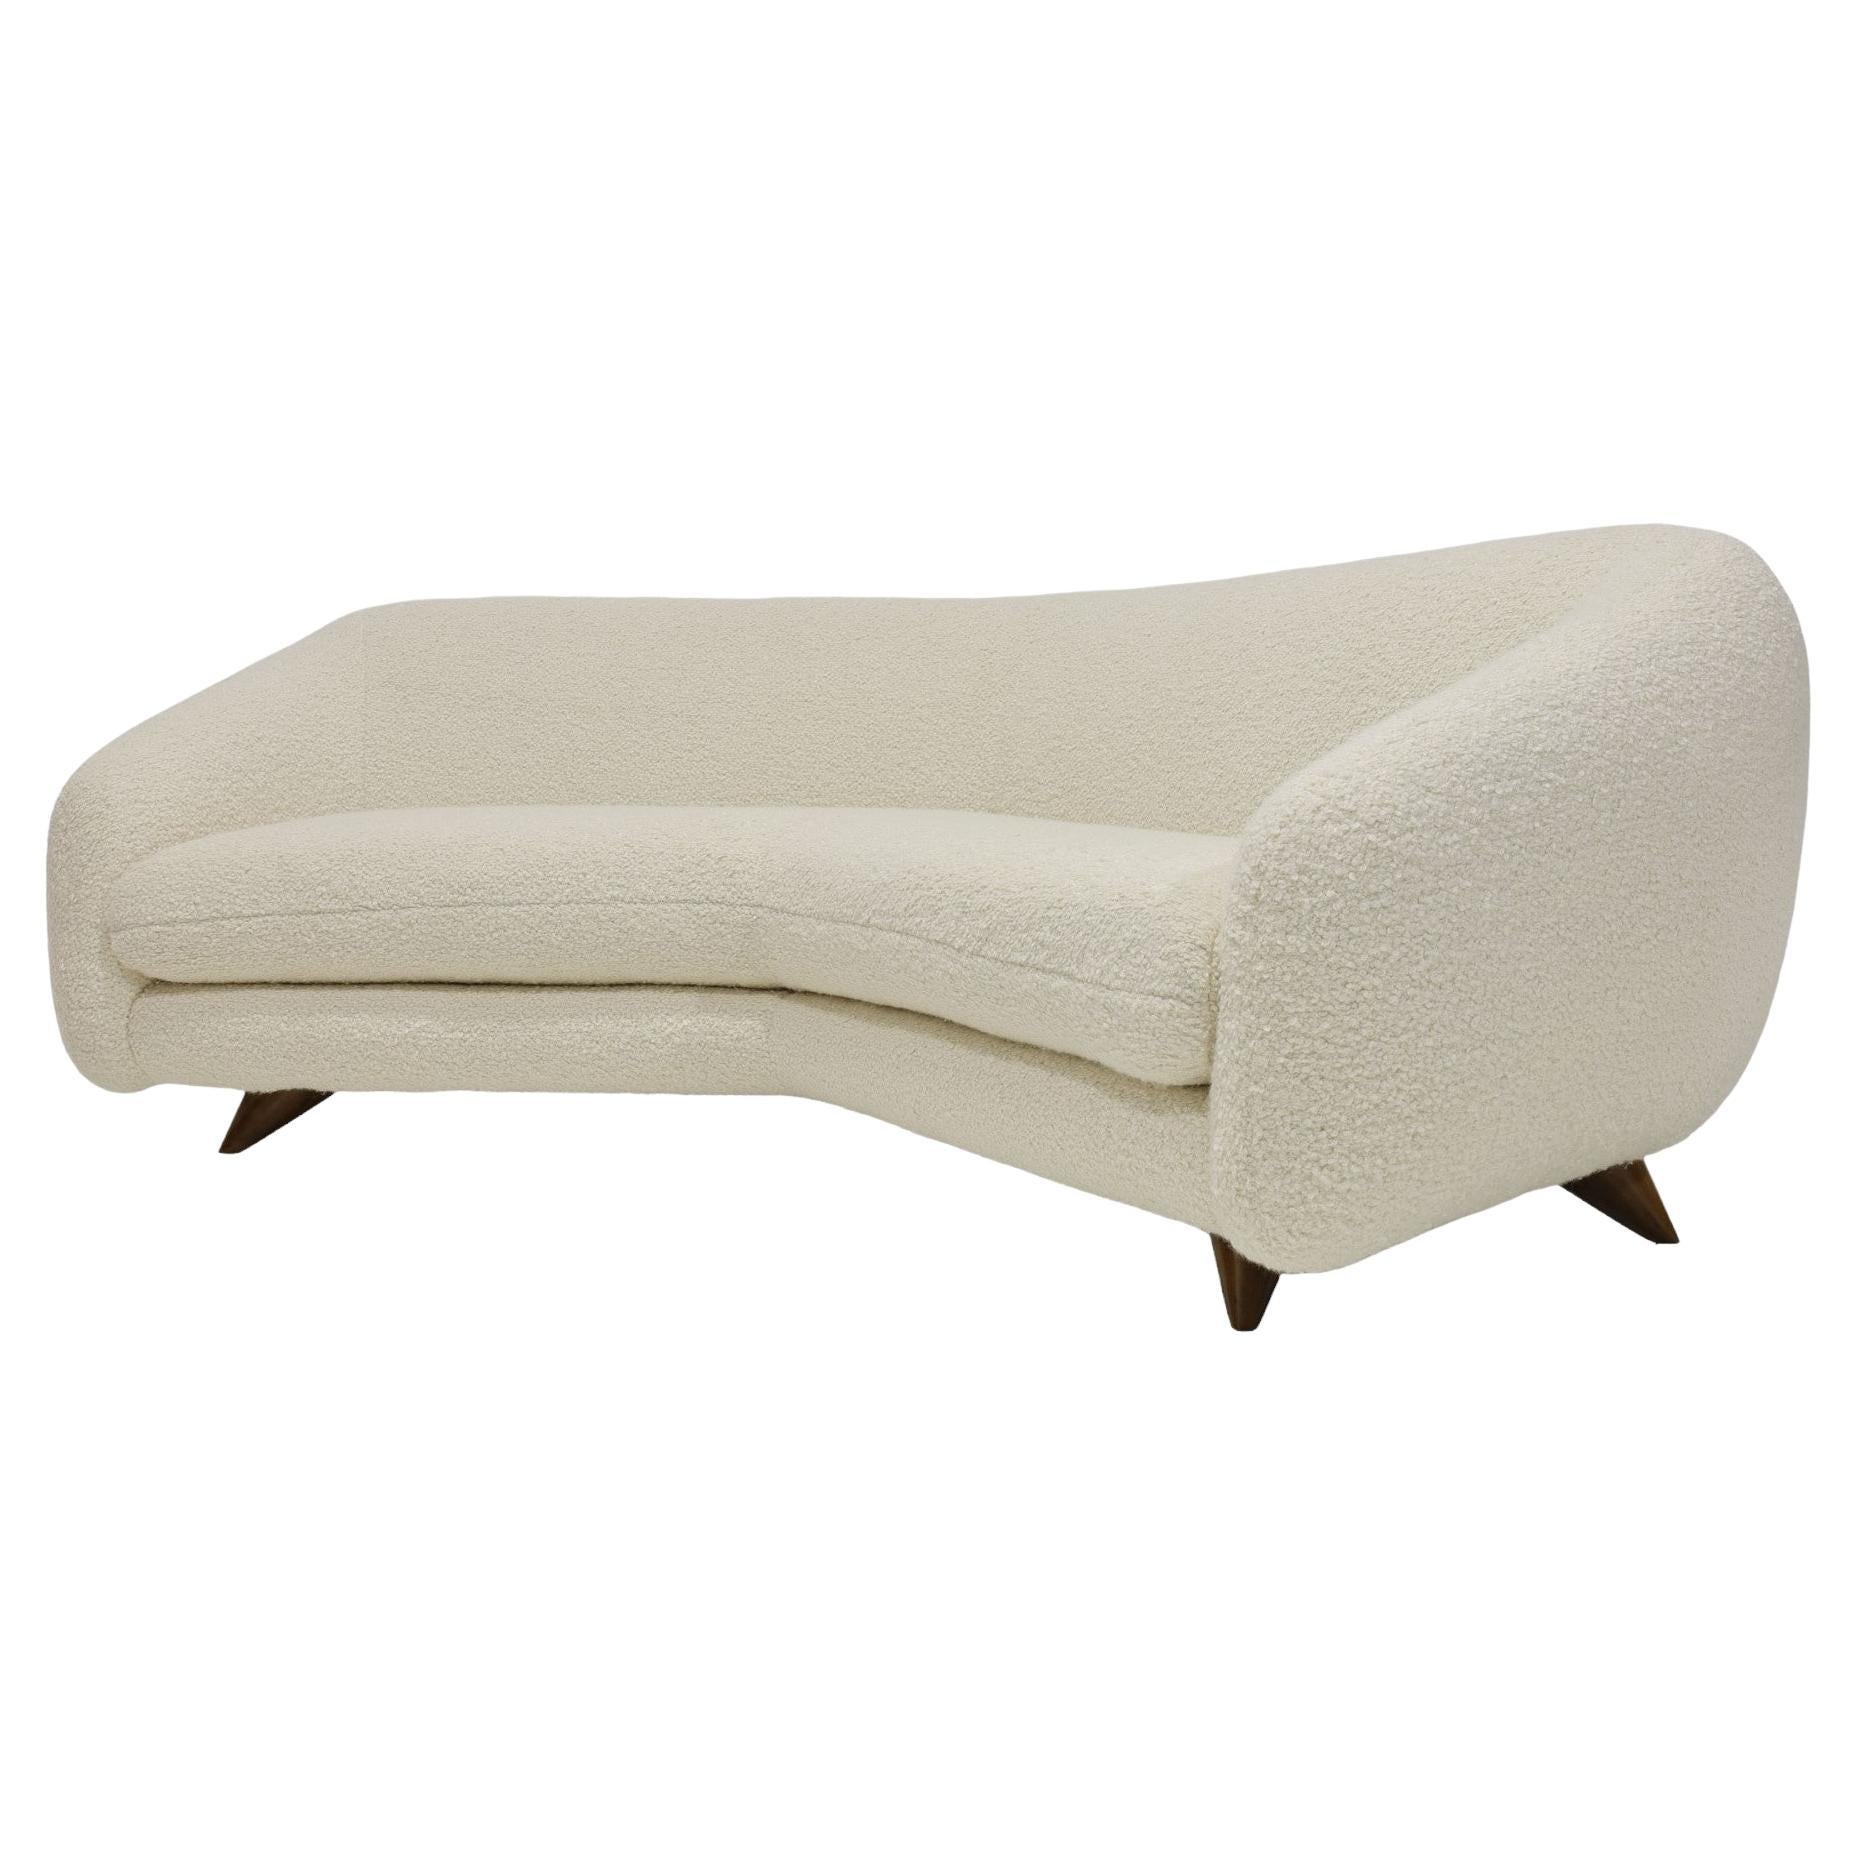 Vladimir Kagan Wide Angle Tangent Sofa, Model 506, in Holly Hunt Teddy, 1950s For Sale